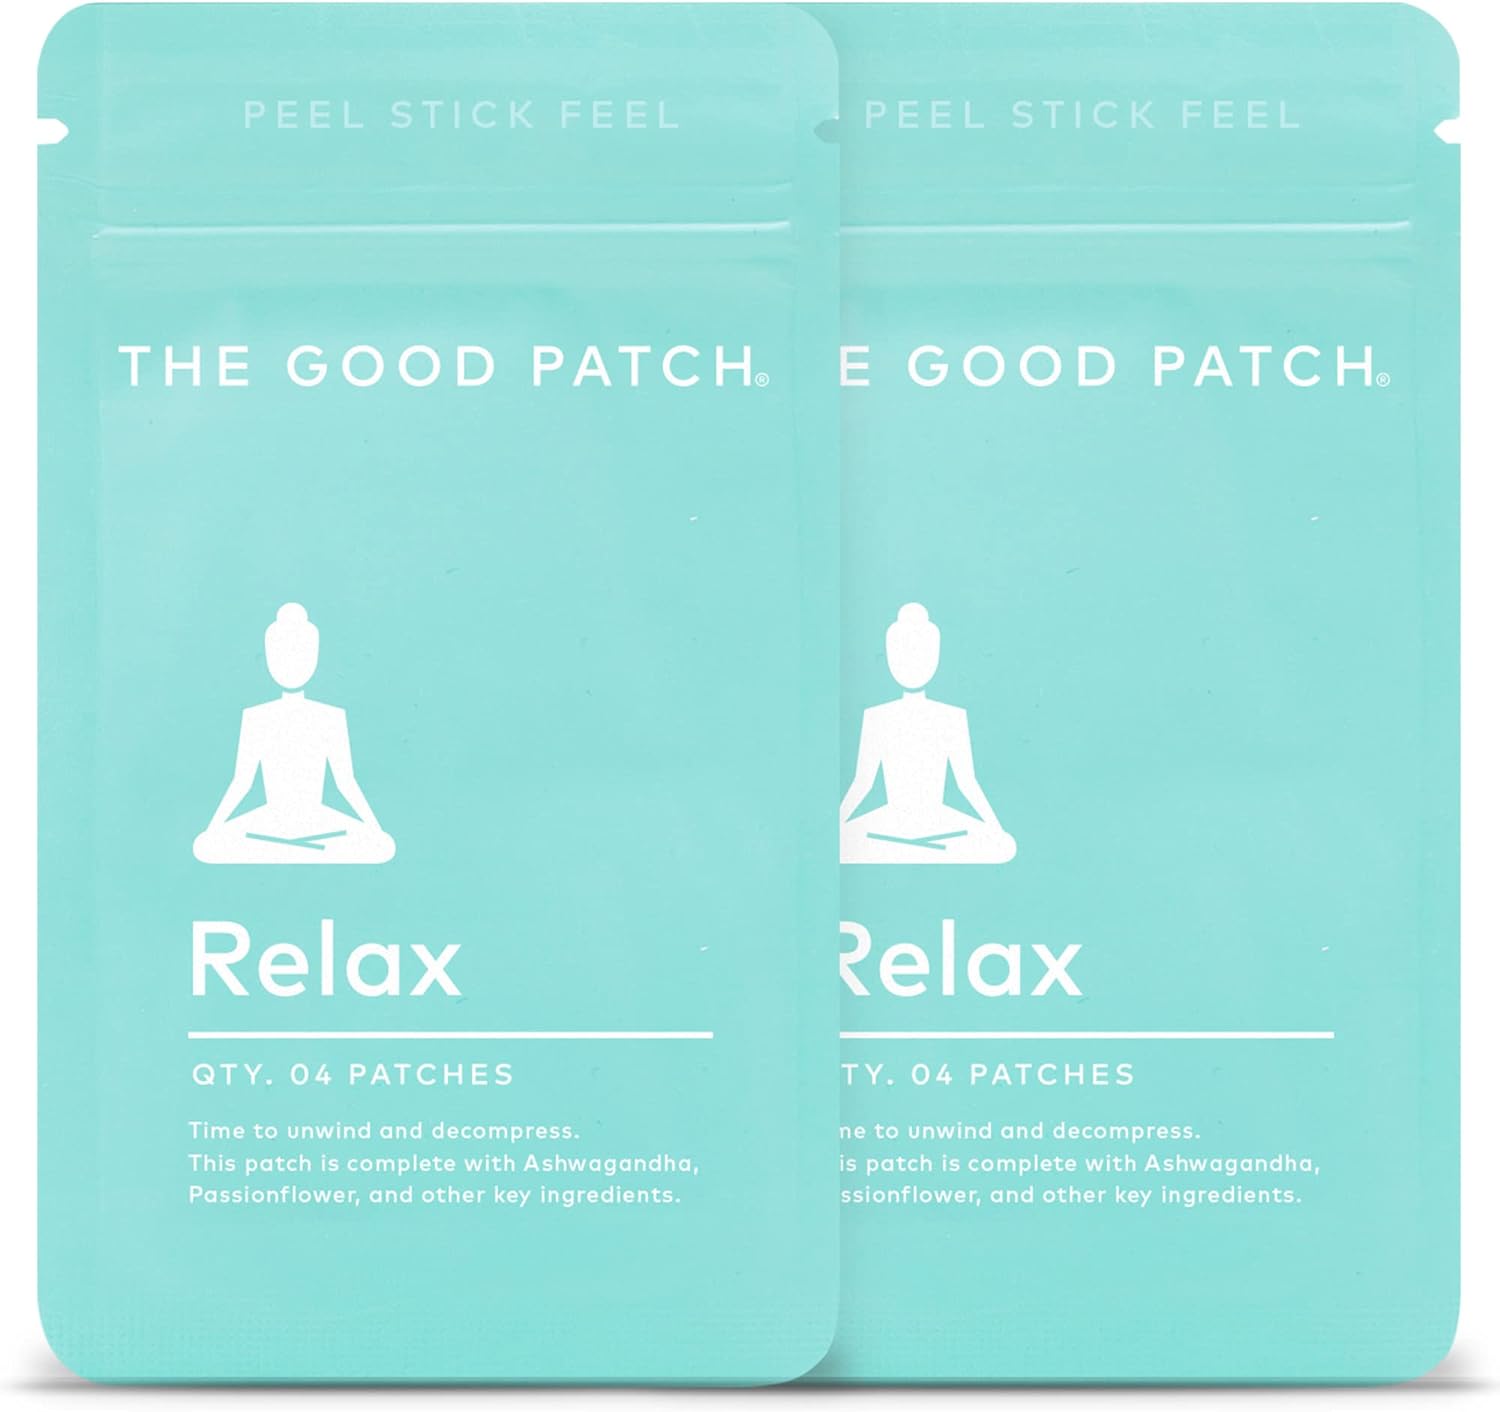 Relaxation patches